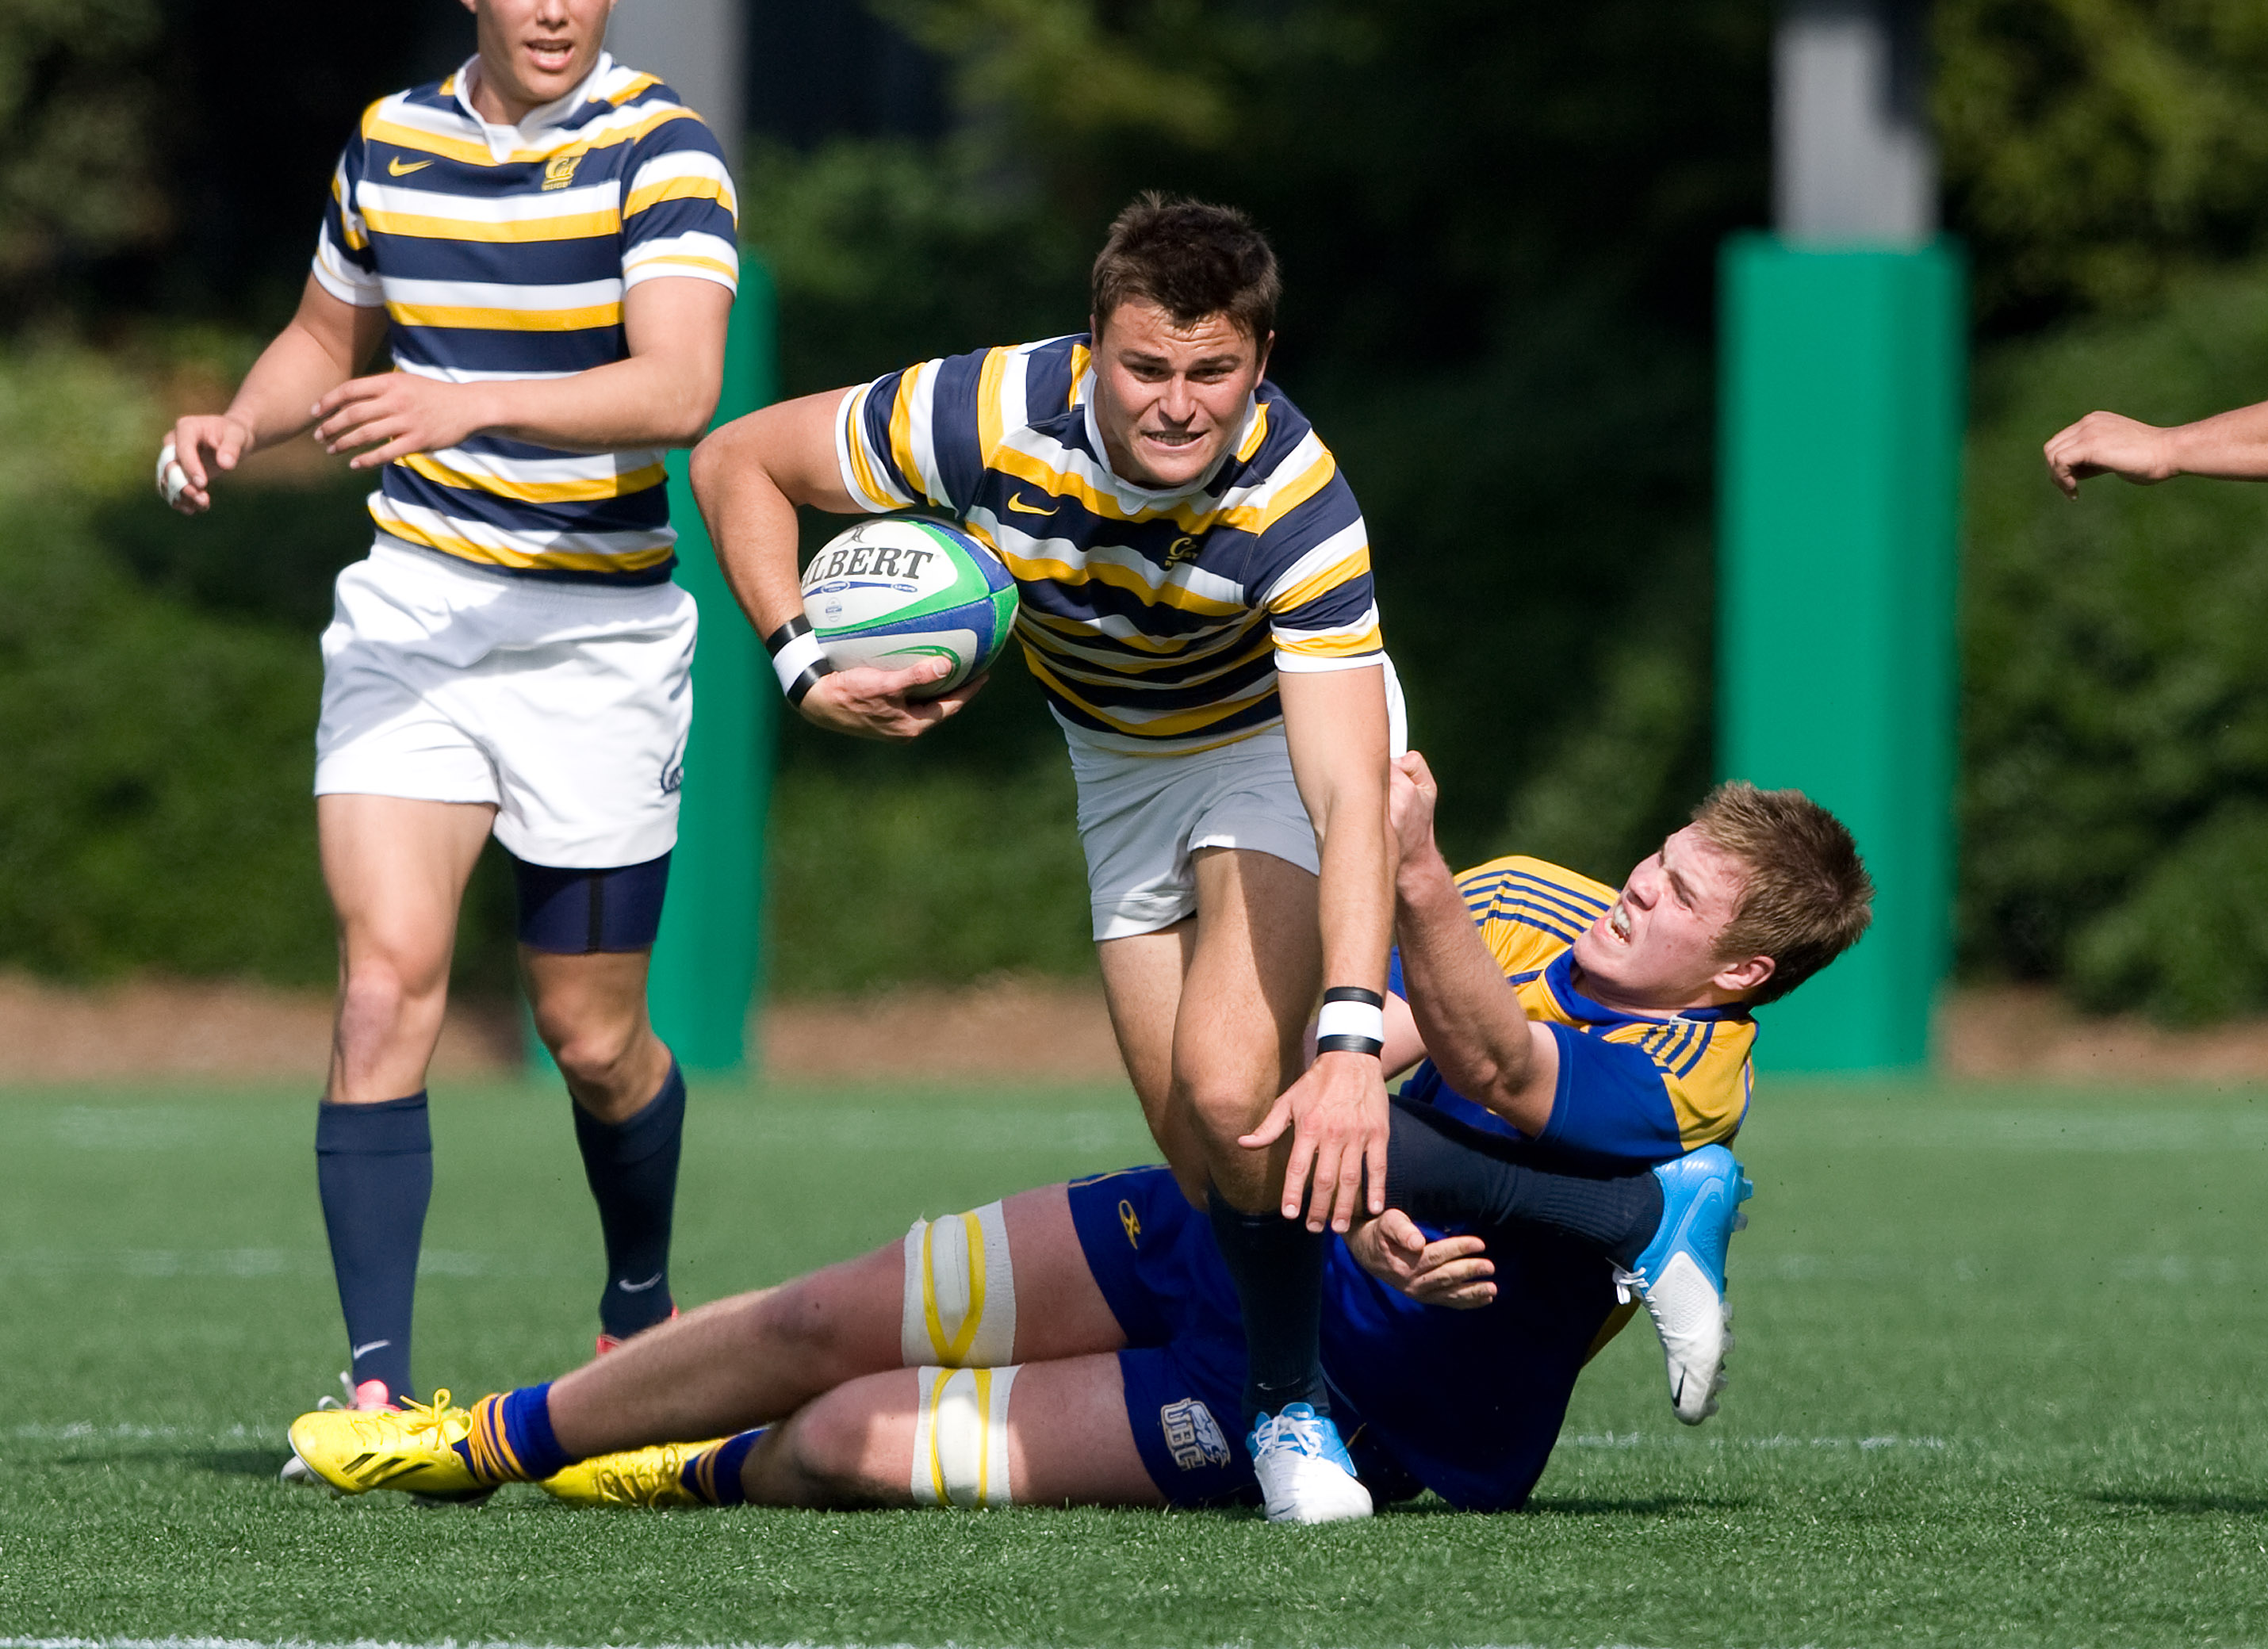 USA College 7s: Cal ahead of the PAC